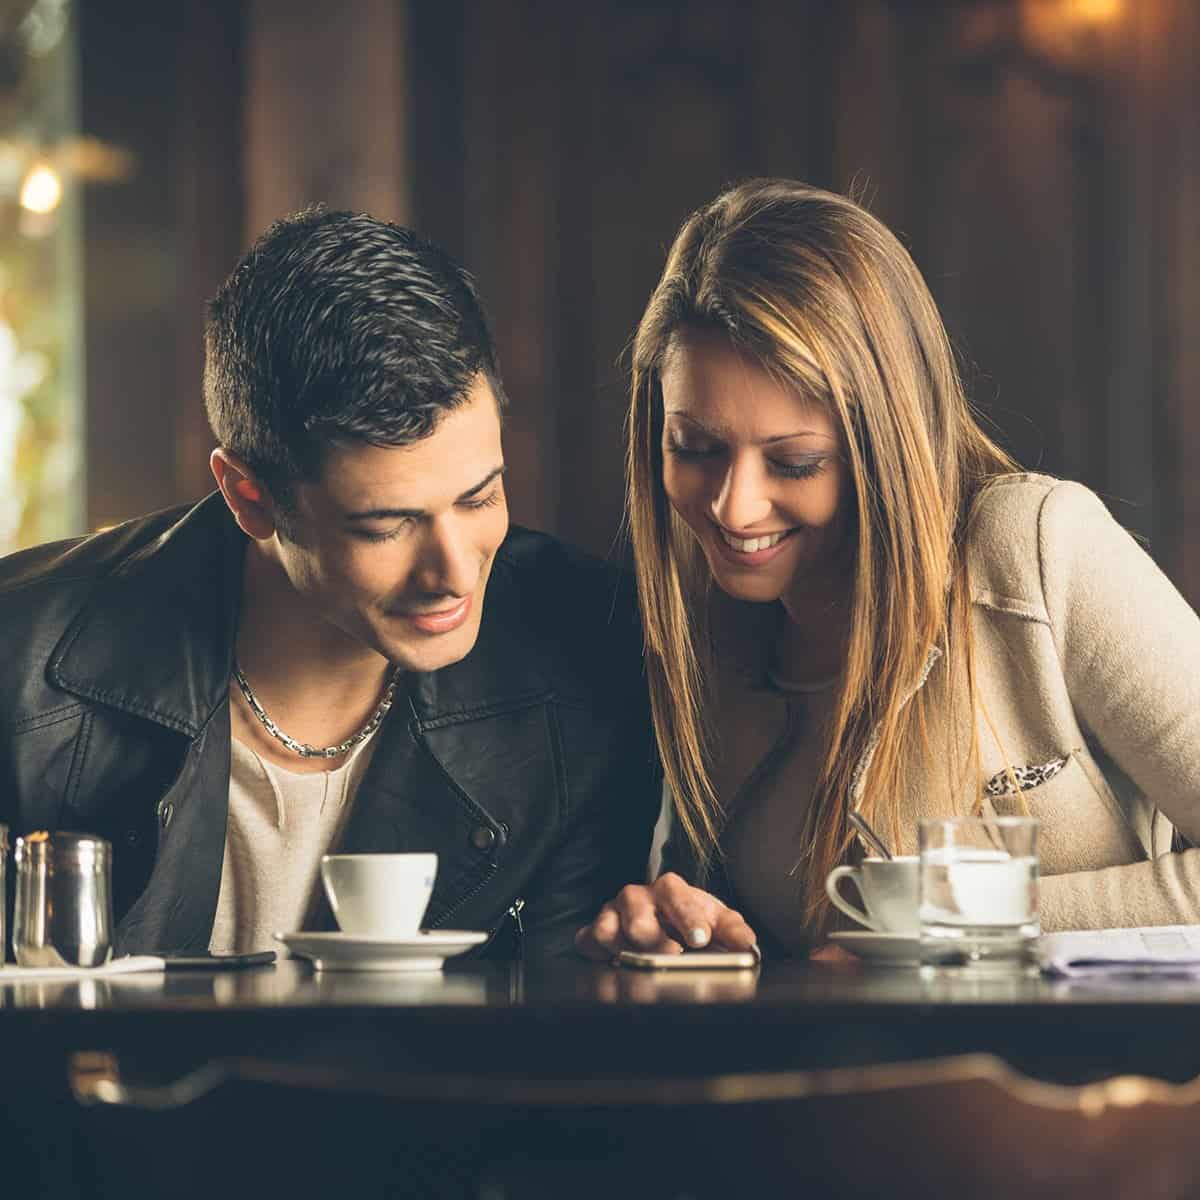 A couple using a phone together at a cafe.